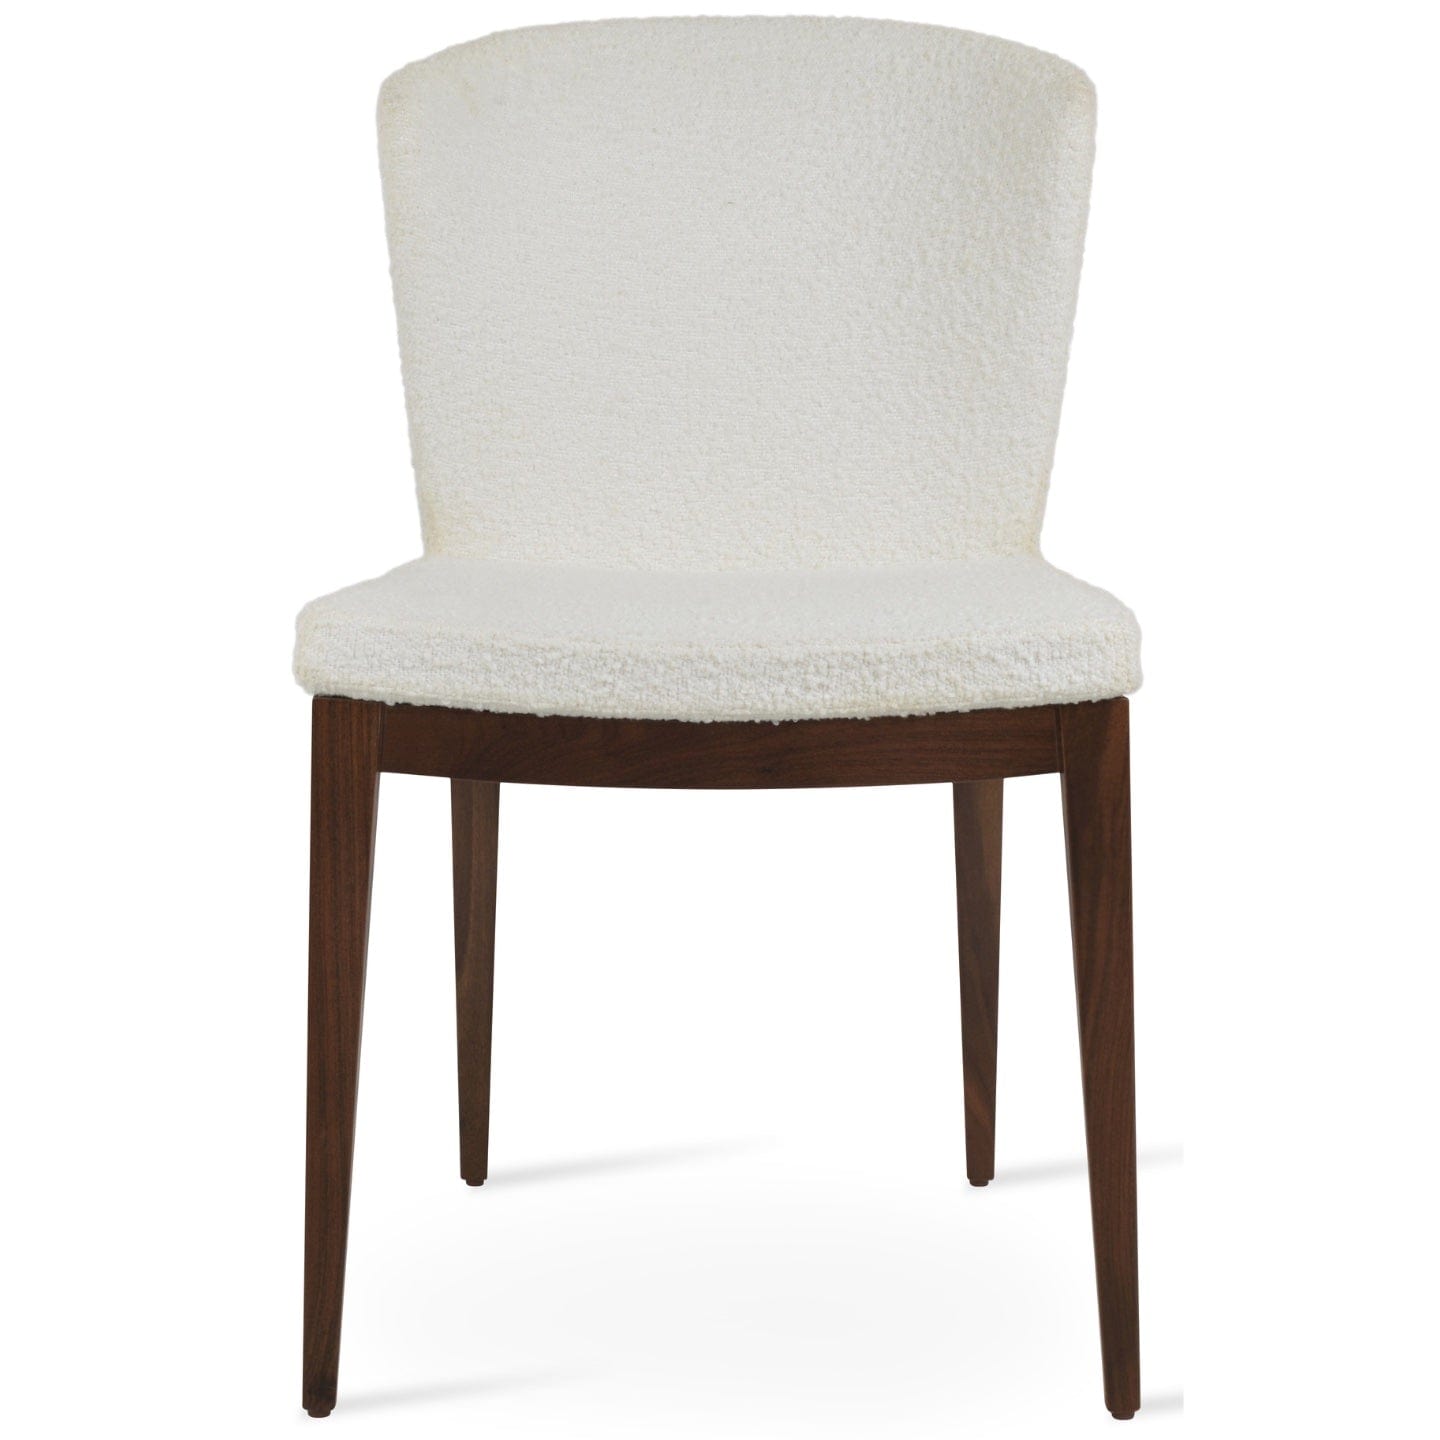 sohoConcept Kitchen & Dining Room Chairs Capri Wood Chairs | Boucle Upholstered Wooden Dining Chairs